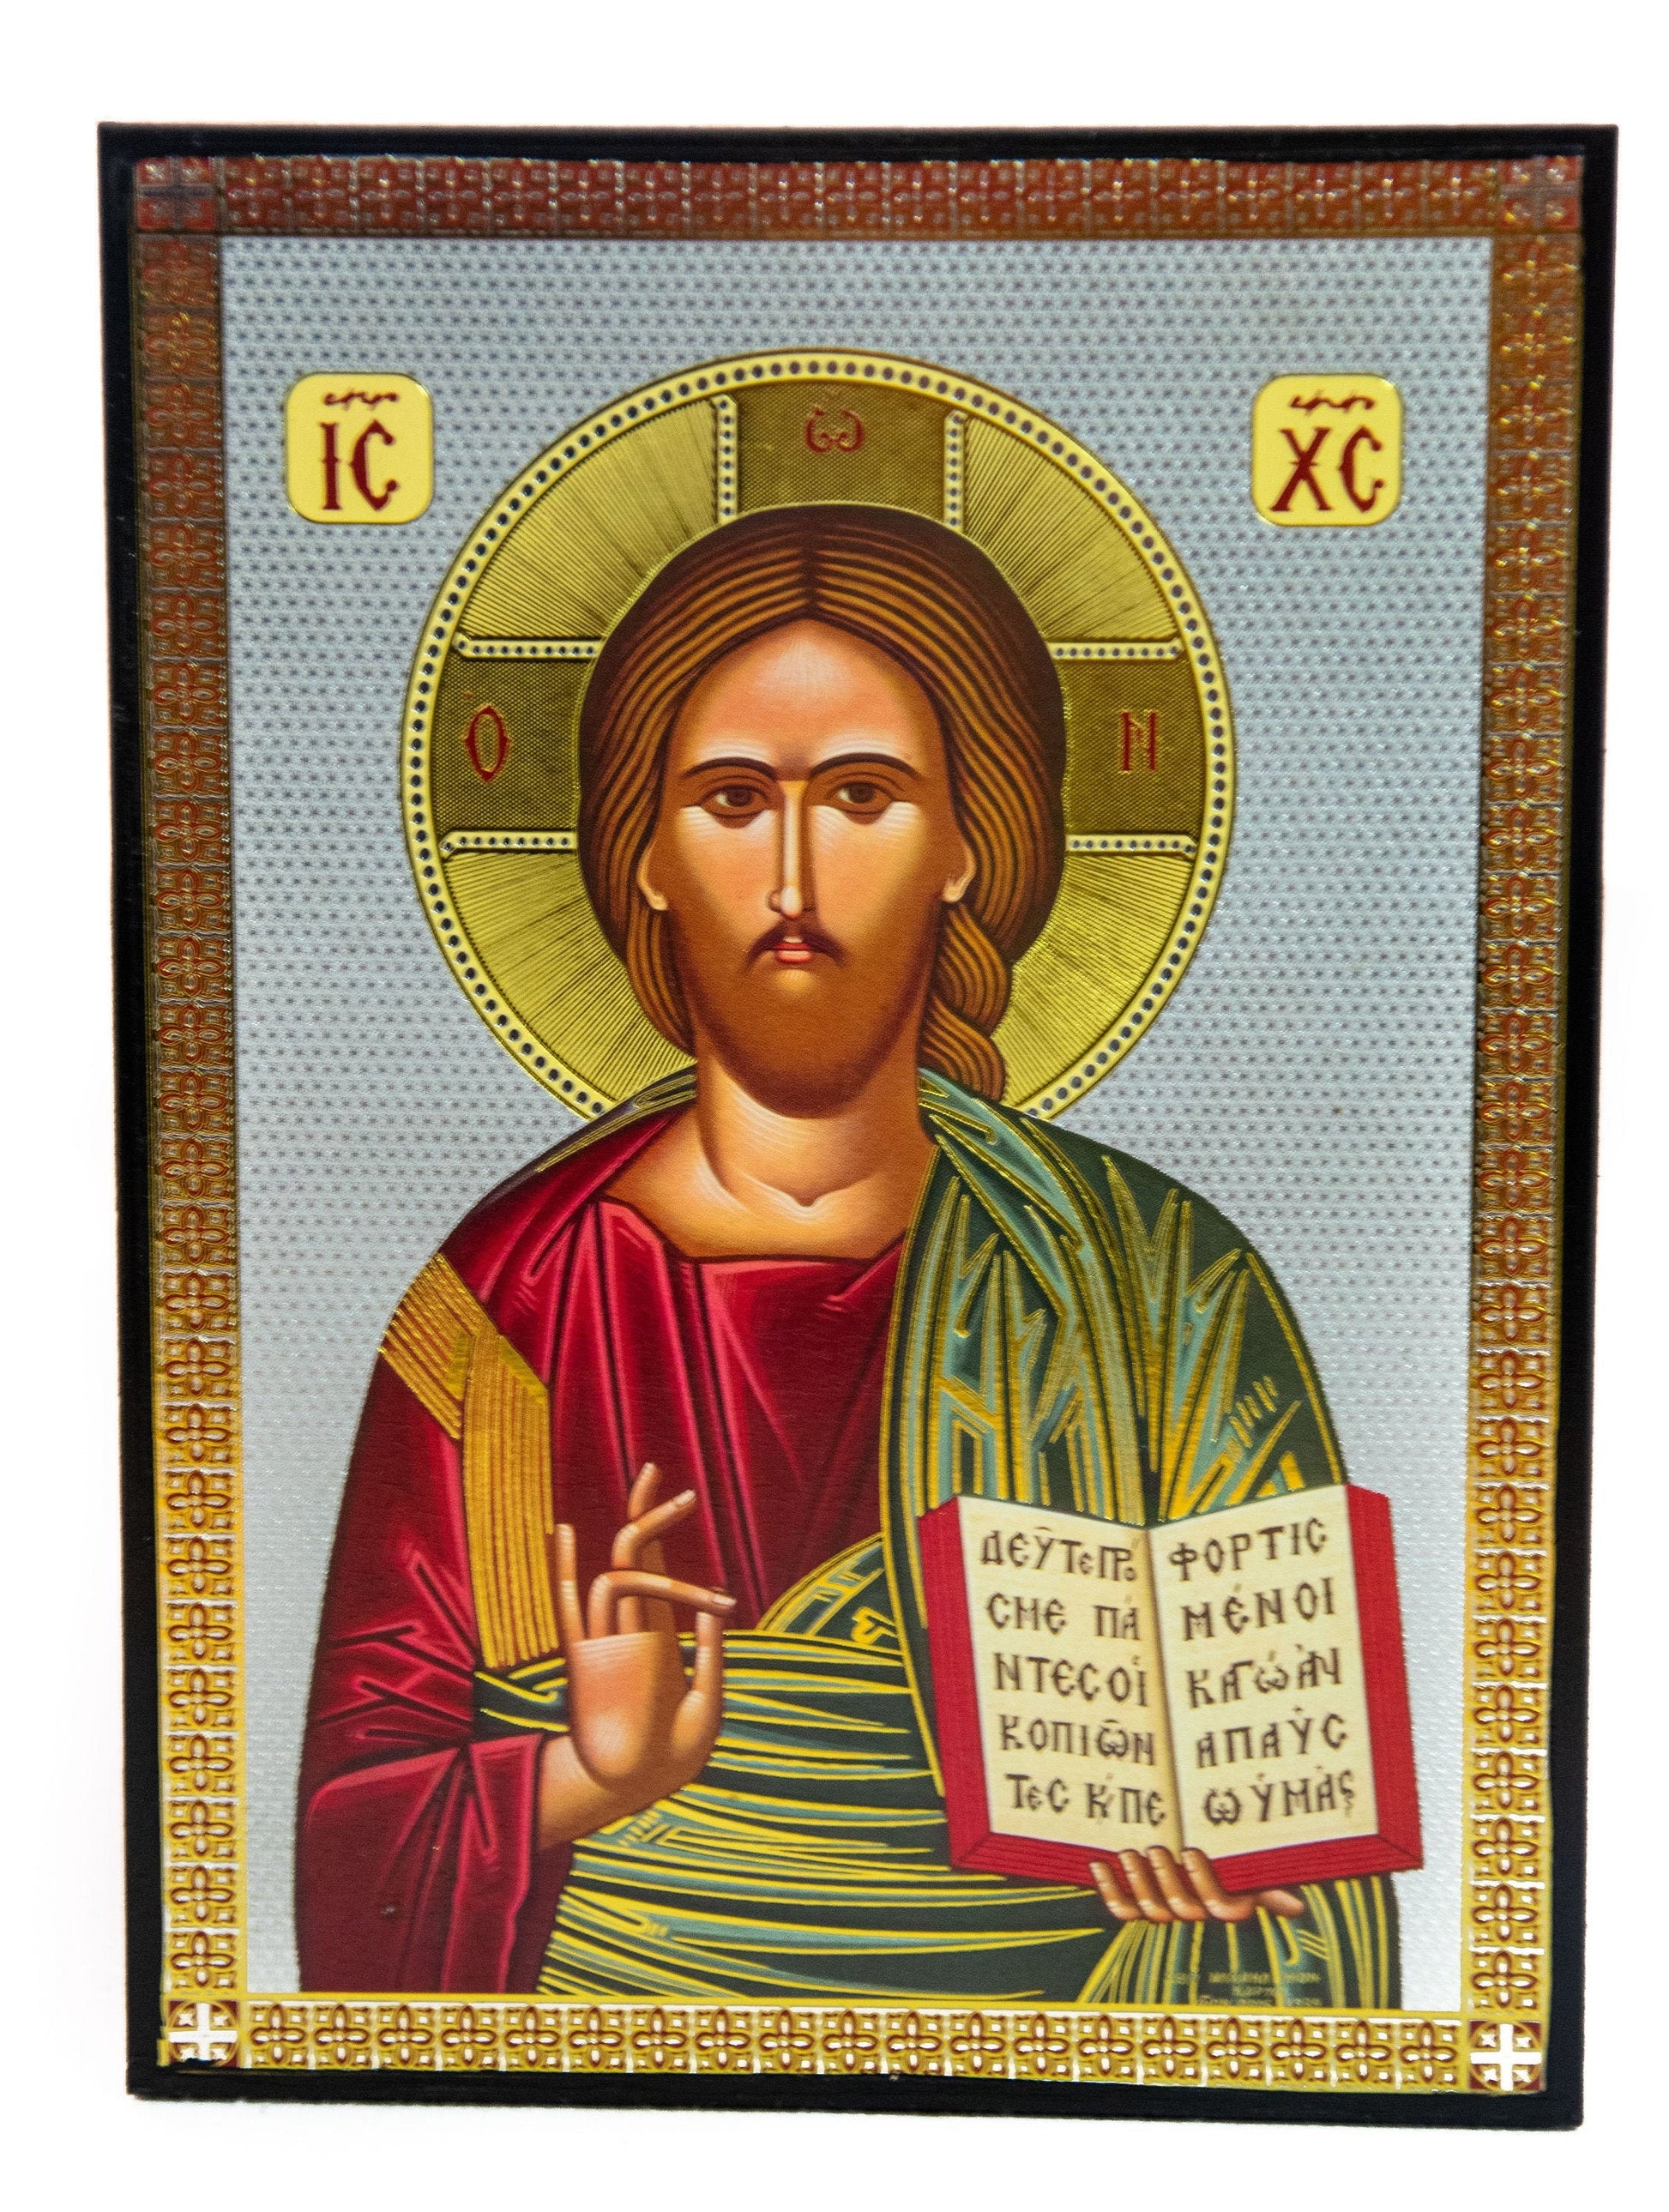 Jesus Christ icon, Handmade Greek Orthodox icon of our Lord, Byzantine art wall hanging on wood plaque, religious icon home decor 22x16cm TheHolyArt